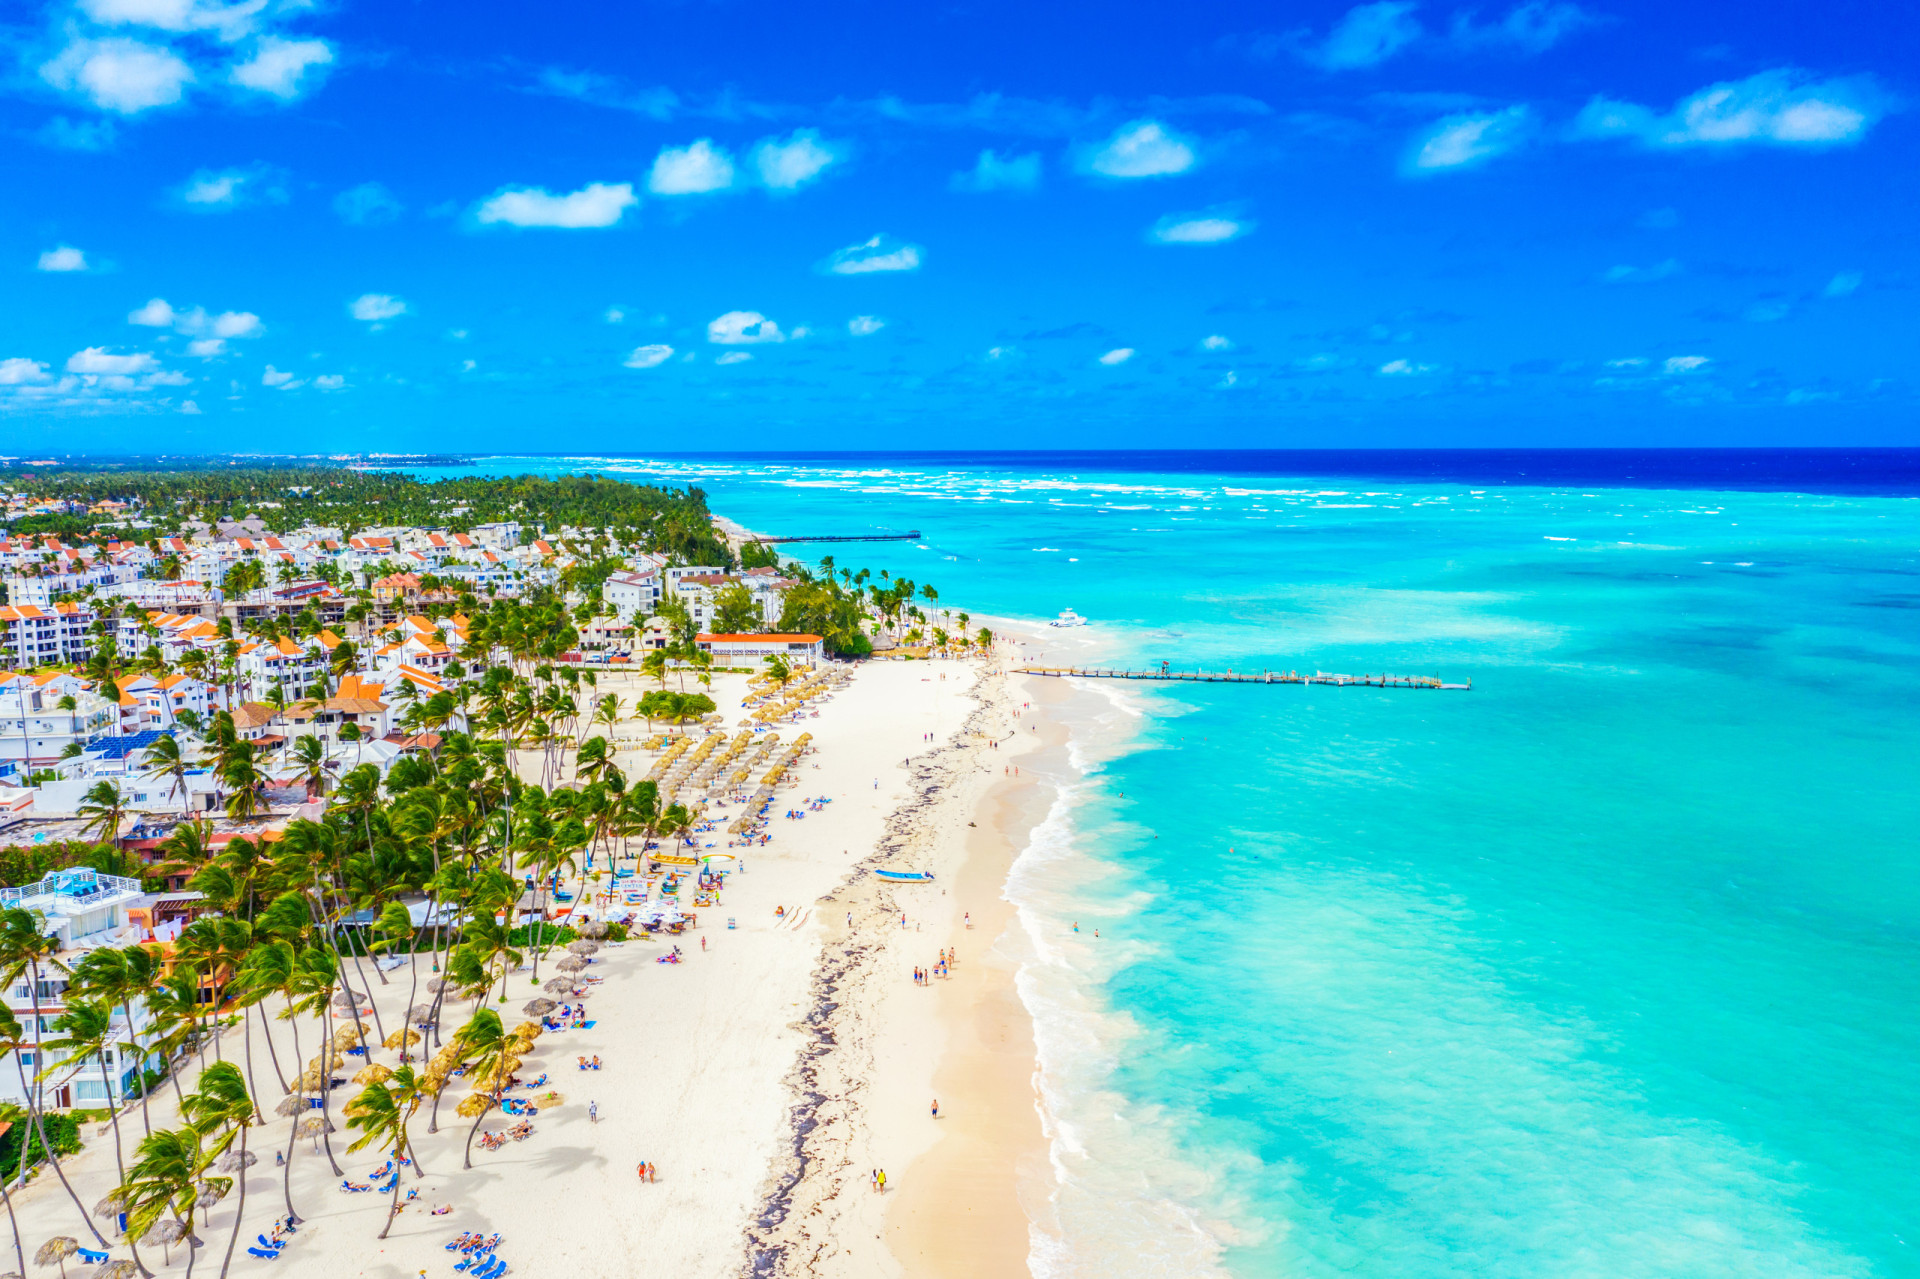 <p>Mexico and the Caribbean are also favorite all-inclusive resort locations, famed for their fabulous beaches and bright, tropical ambiance.</p><p><a href="https://www.msn.com/en-us/community/channel/vid-7xx8mnucu55yw63we9va2gwr7uihbxwc68fxqp25x6tg4ftibpra?cvid=94631541bc0f4f89bfd59158d696ad7e">Follow us and access great exclusive content every day</a></p>